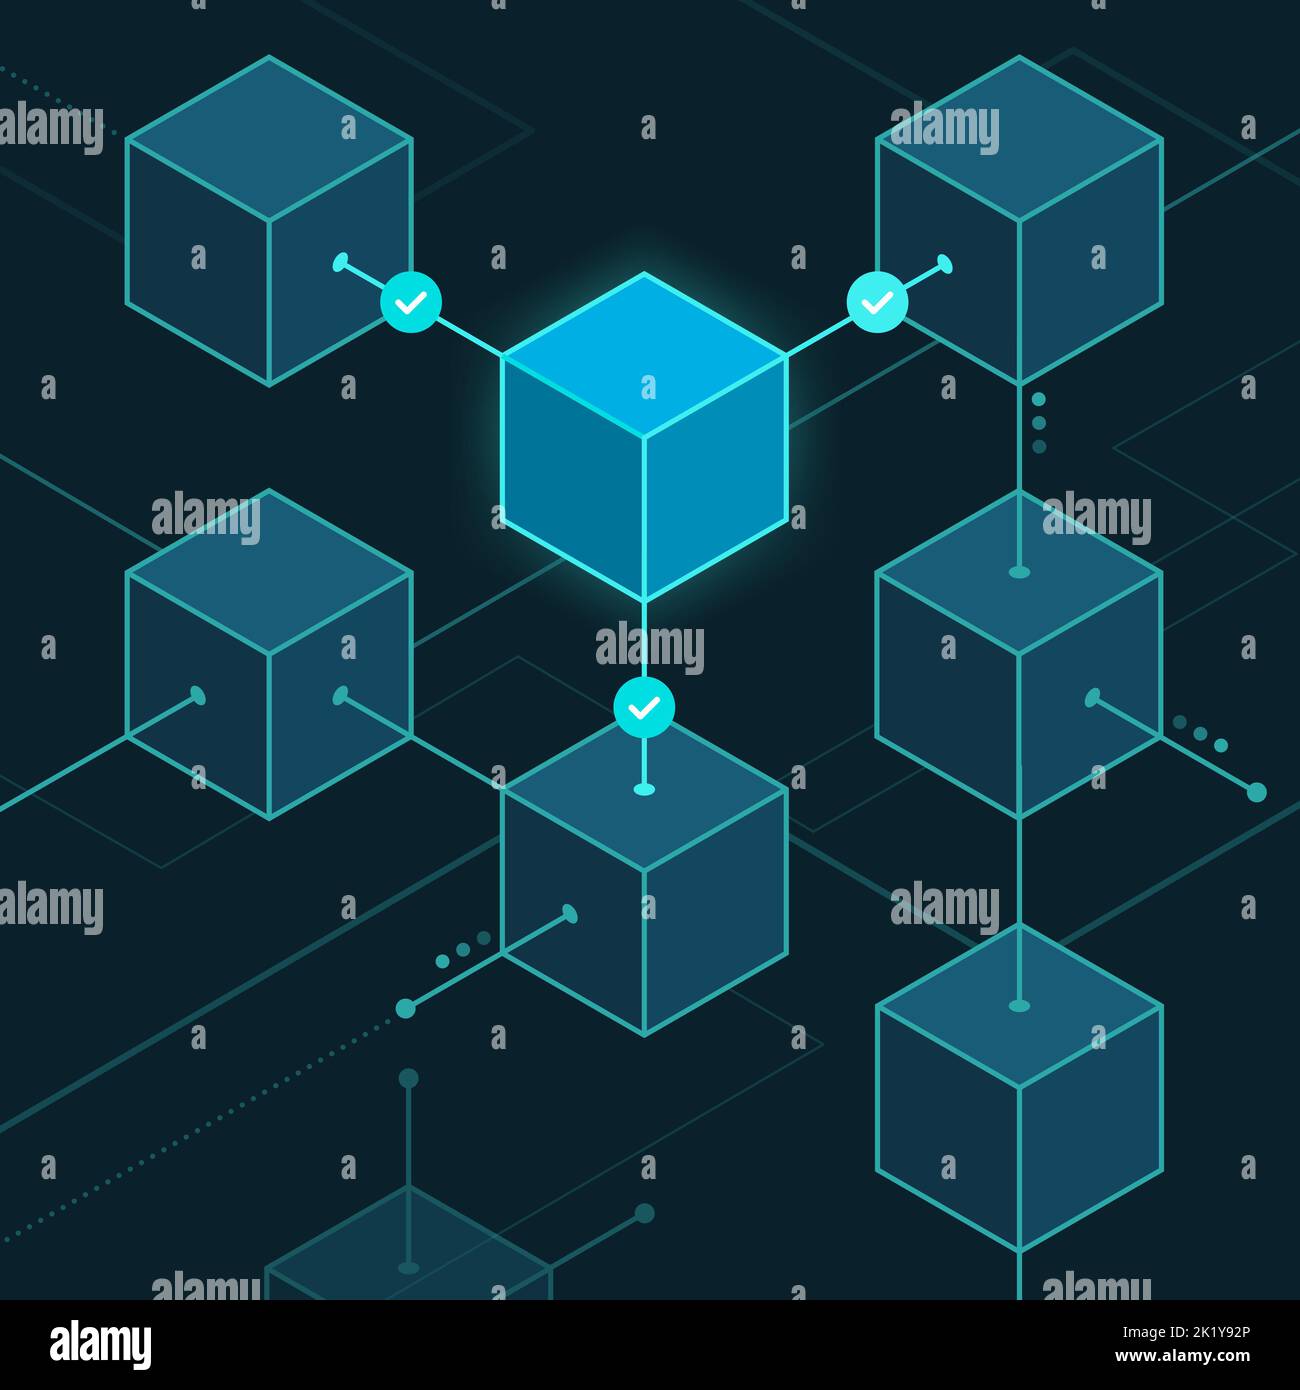 Blocks joined together in a network: blockchain and digital ledger Stock Vector